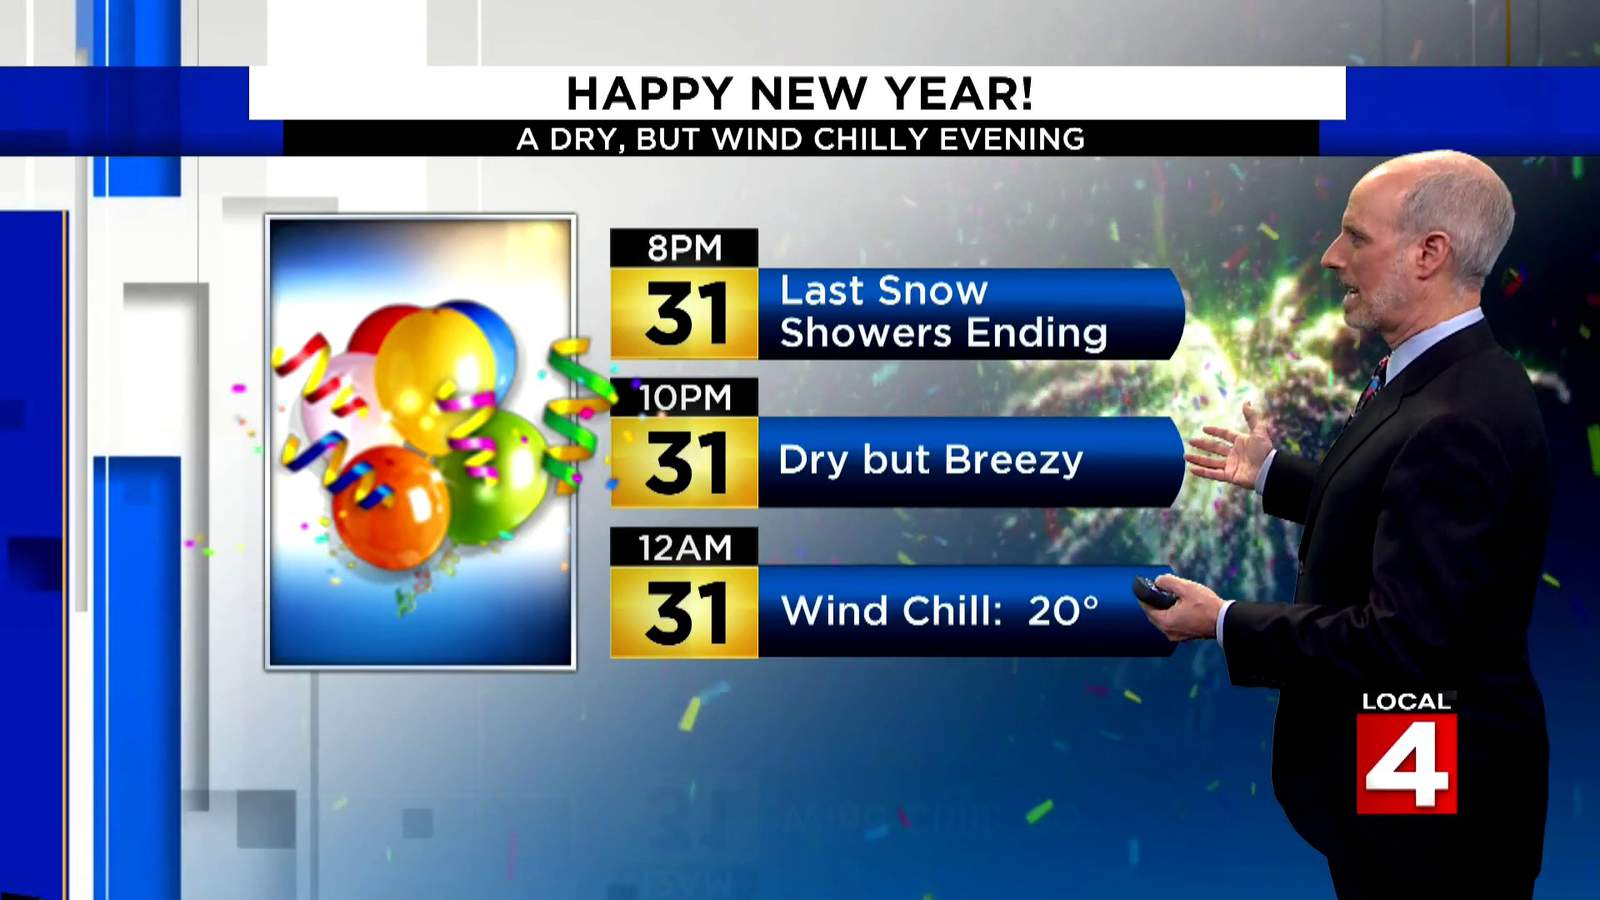 Metro Detroit weather: Scattered snow showers heading into New Year’s Eve